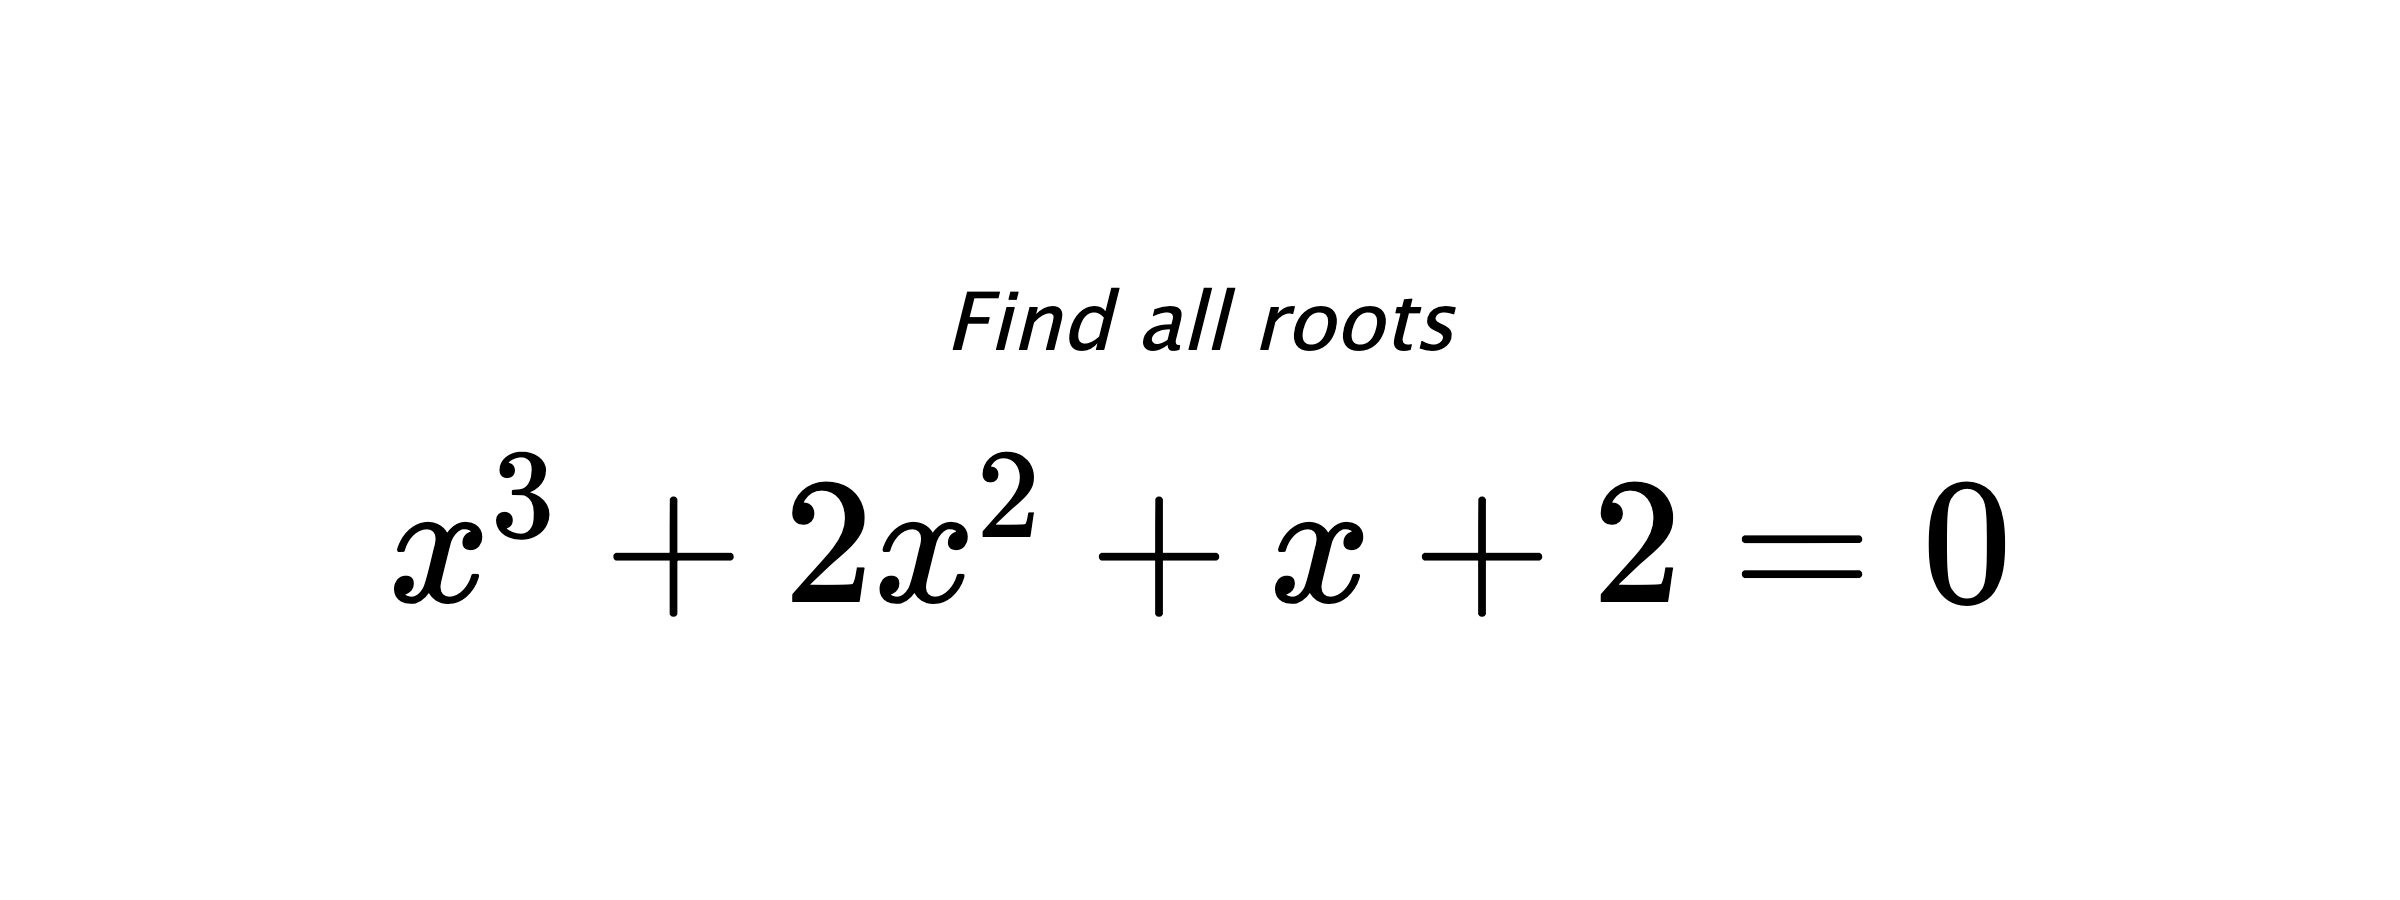 Find all roots $ x^{3}+2x^{2}+x+2=0 $